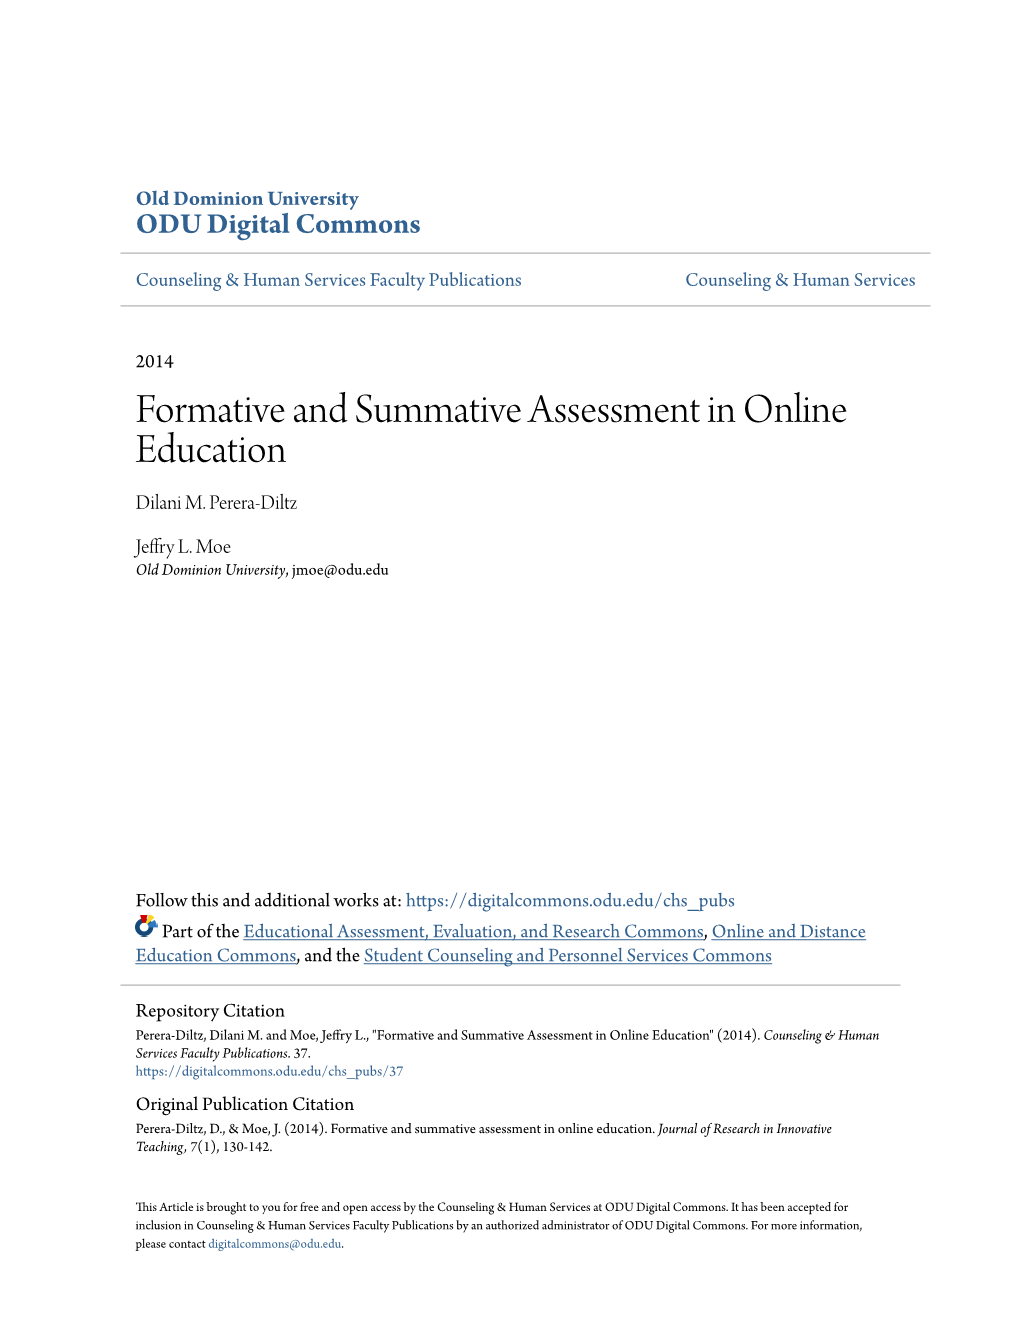 Formative and Summative Assessment in Online Education Dilani M